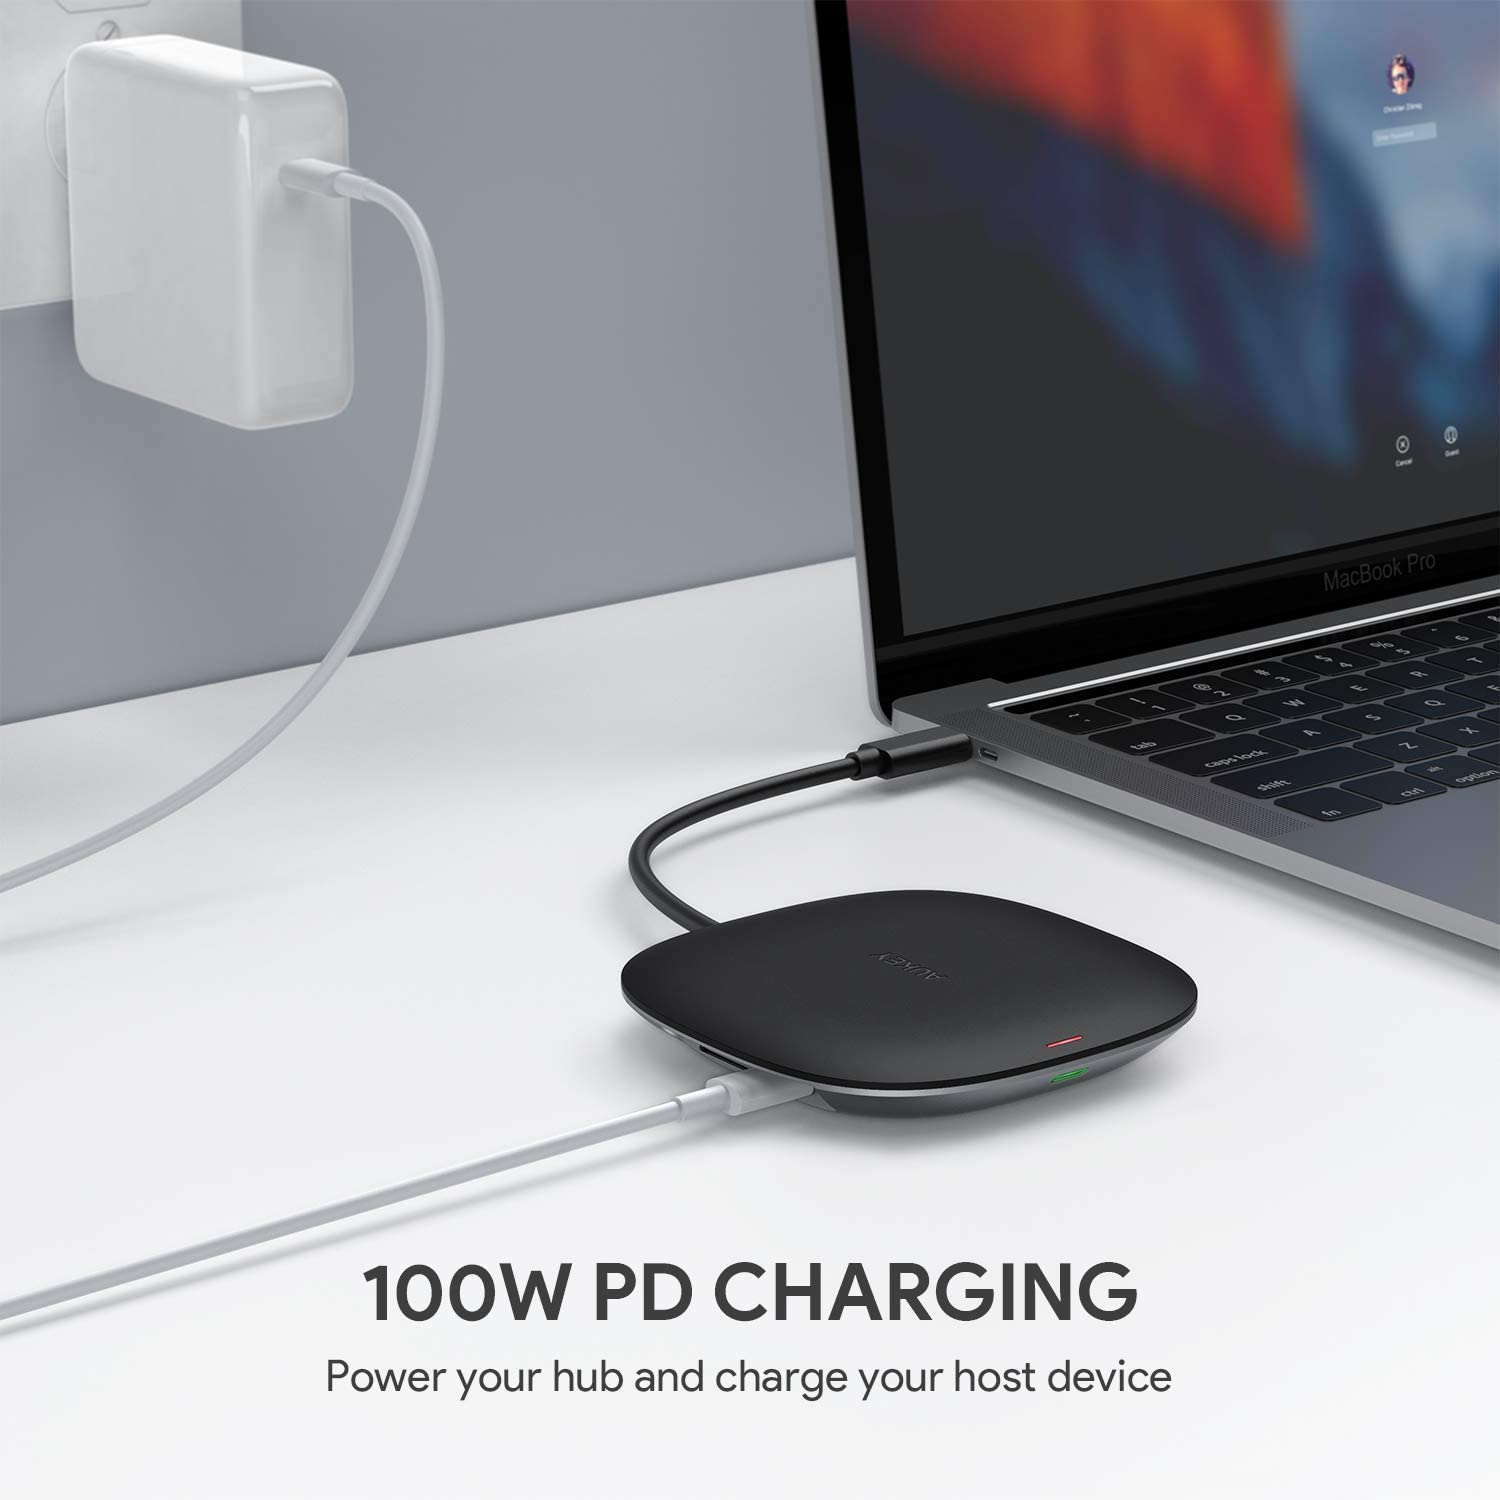 AUKEY USB C Hub Adapter Wireless Charger 5-in-1 Type-C 4K HDMI 60W USB-C PD Port